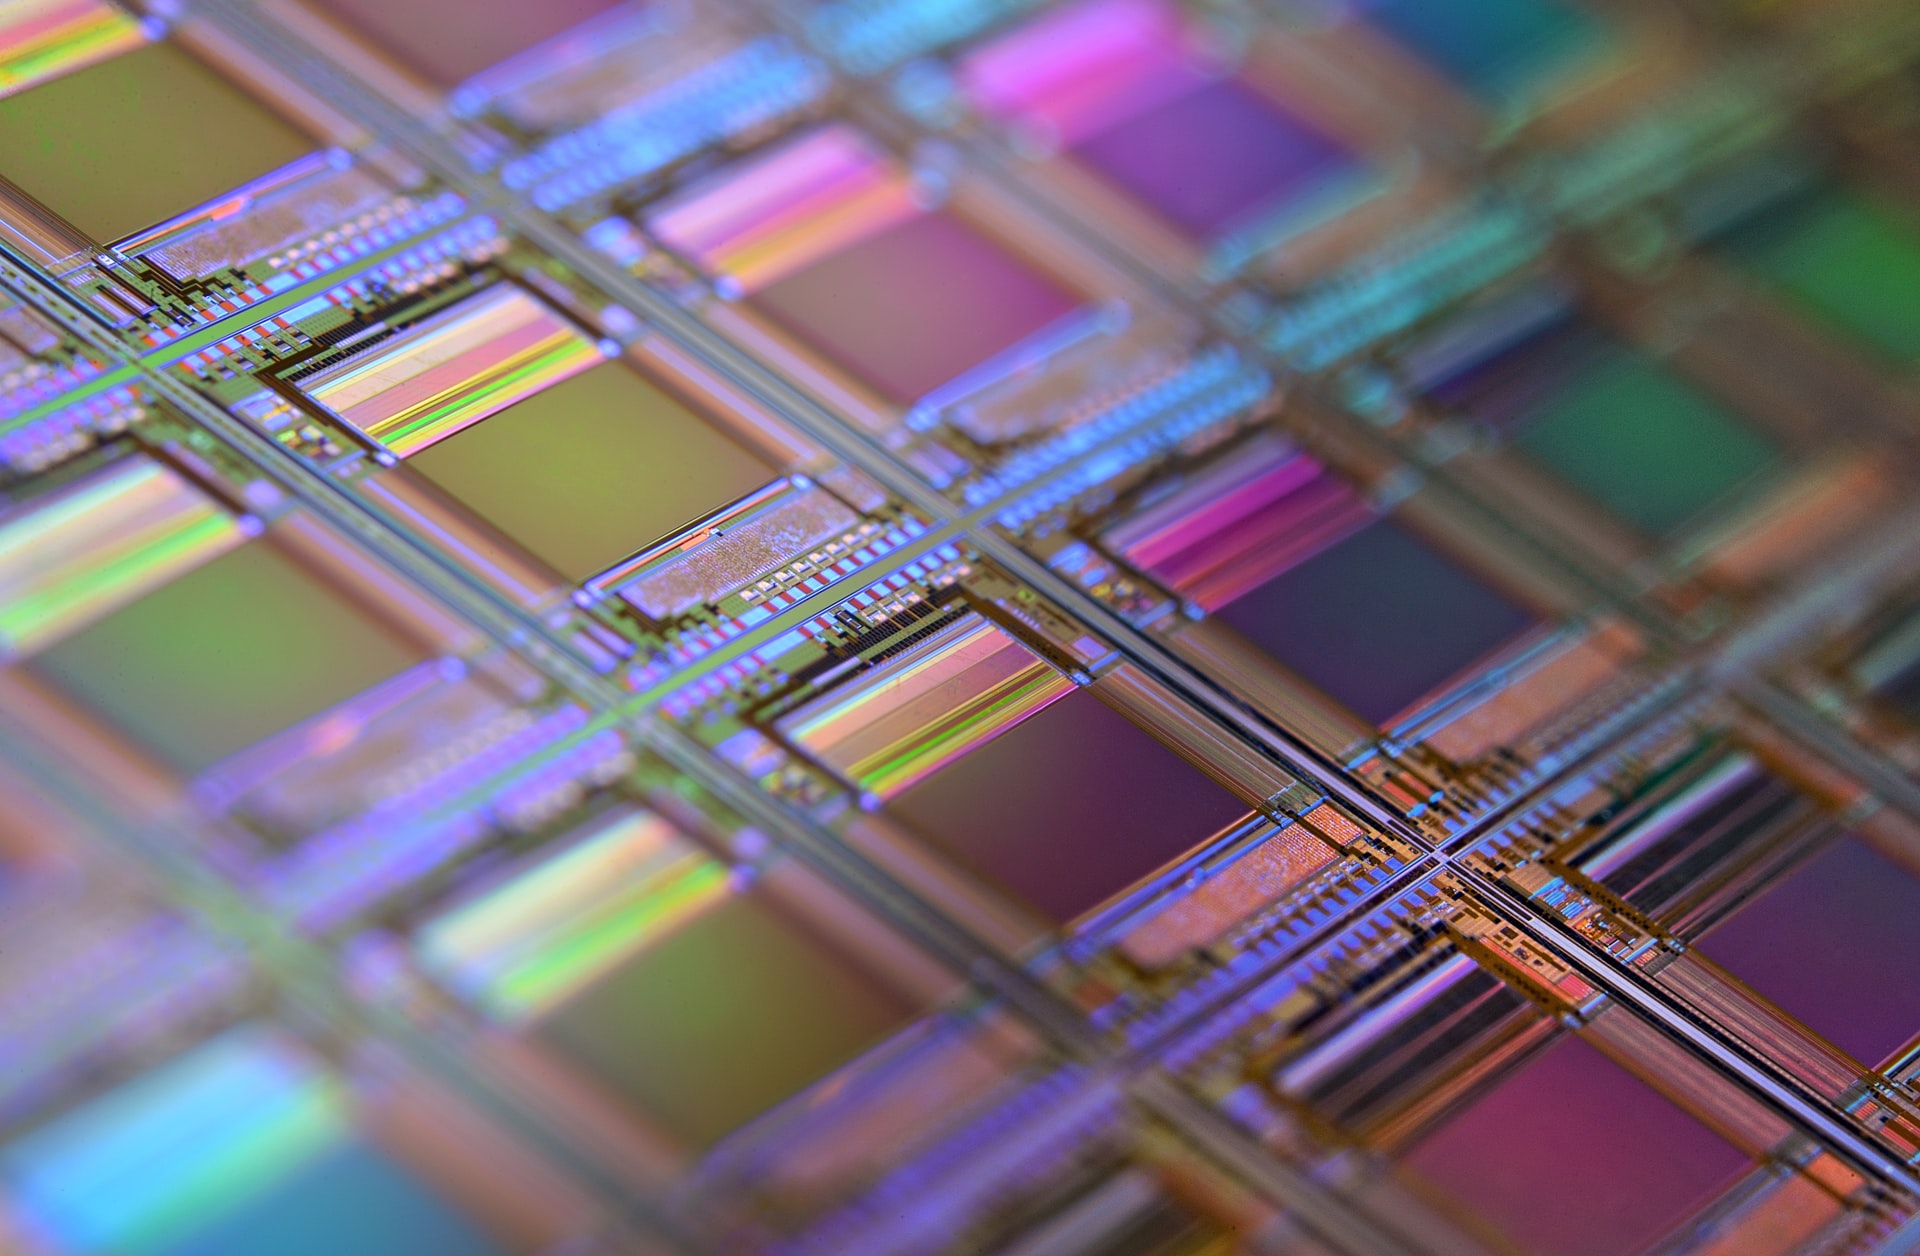 Semiconductor Industry Set for Another Year of Soaring Chip Prices, Already Raking in Record Revenues